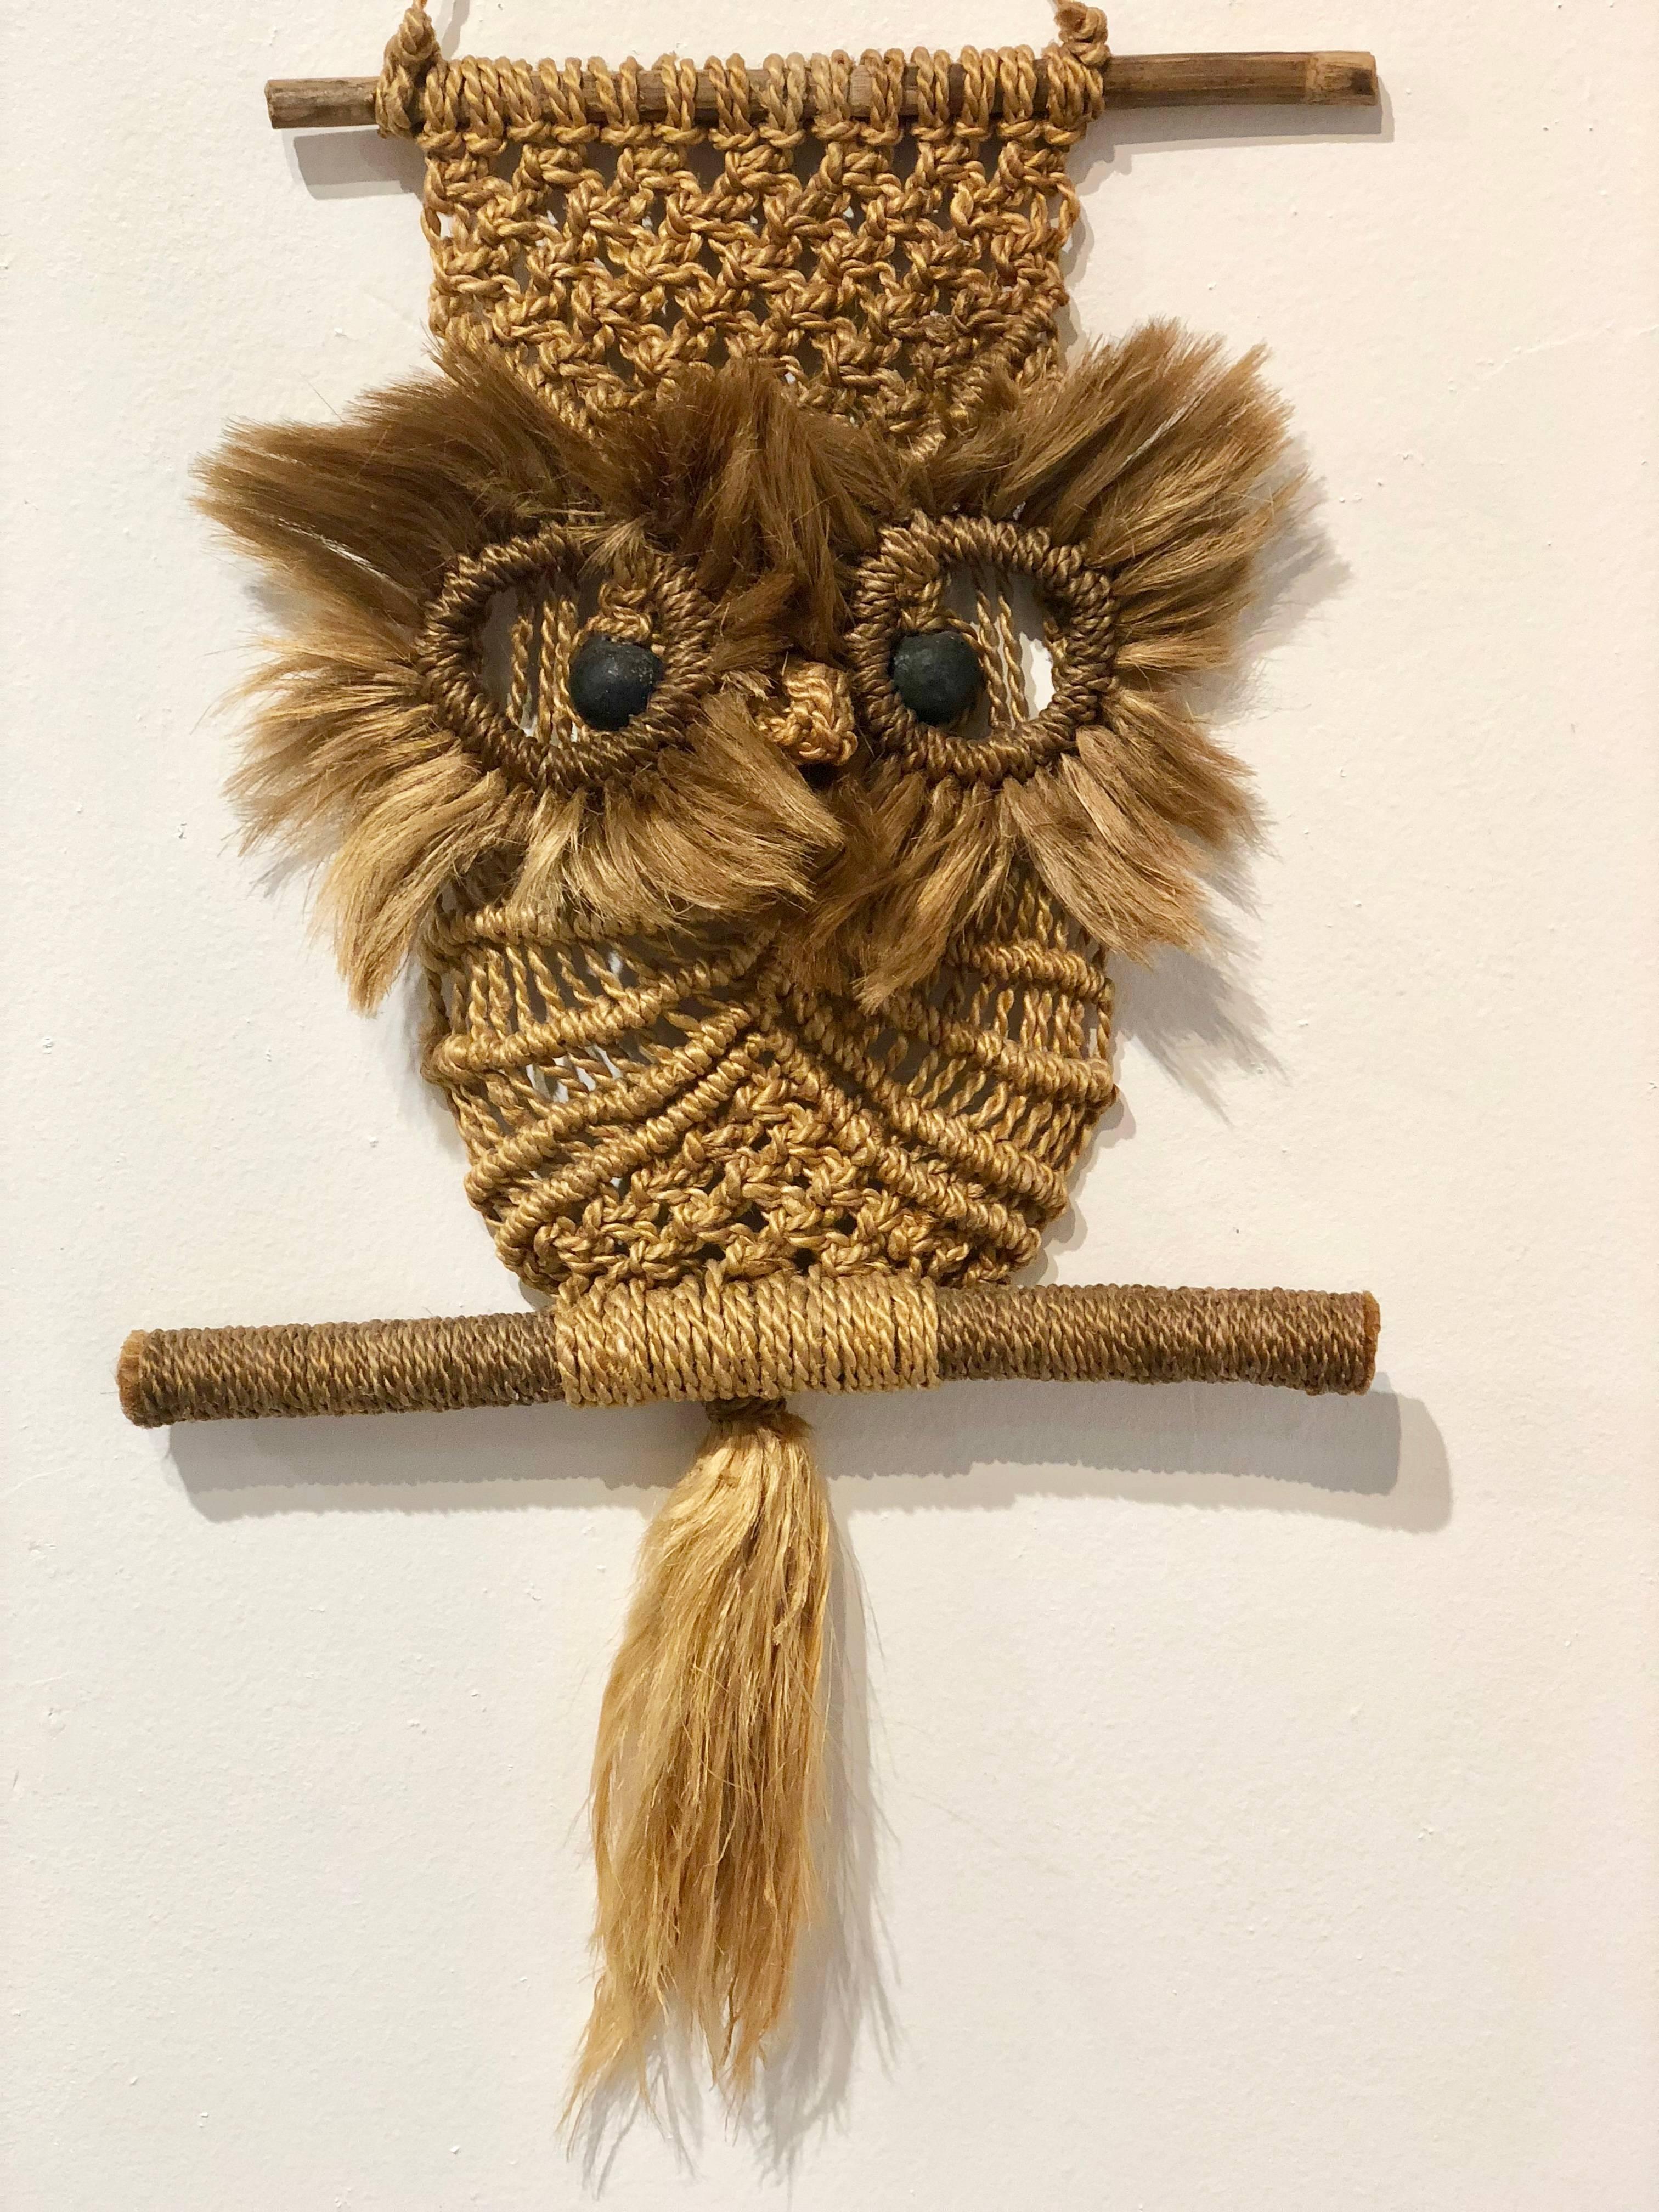 Unique macrame owl, circa 1970s, a cool piece to add in the kids room.